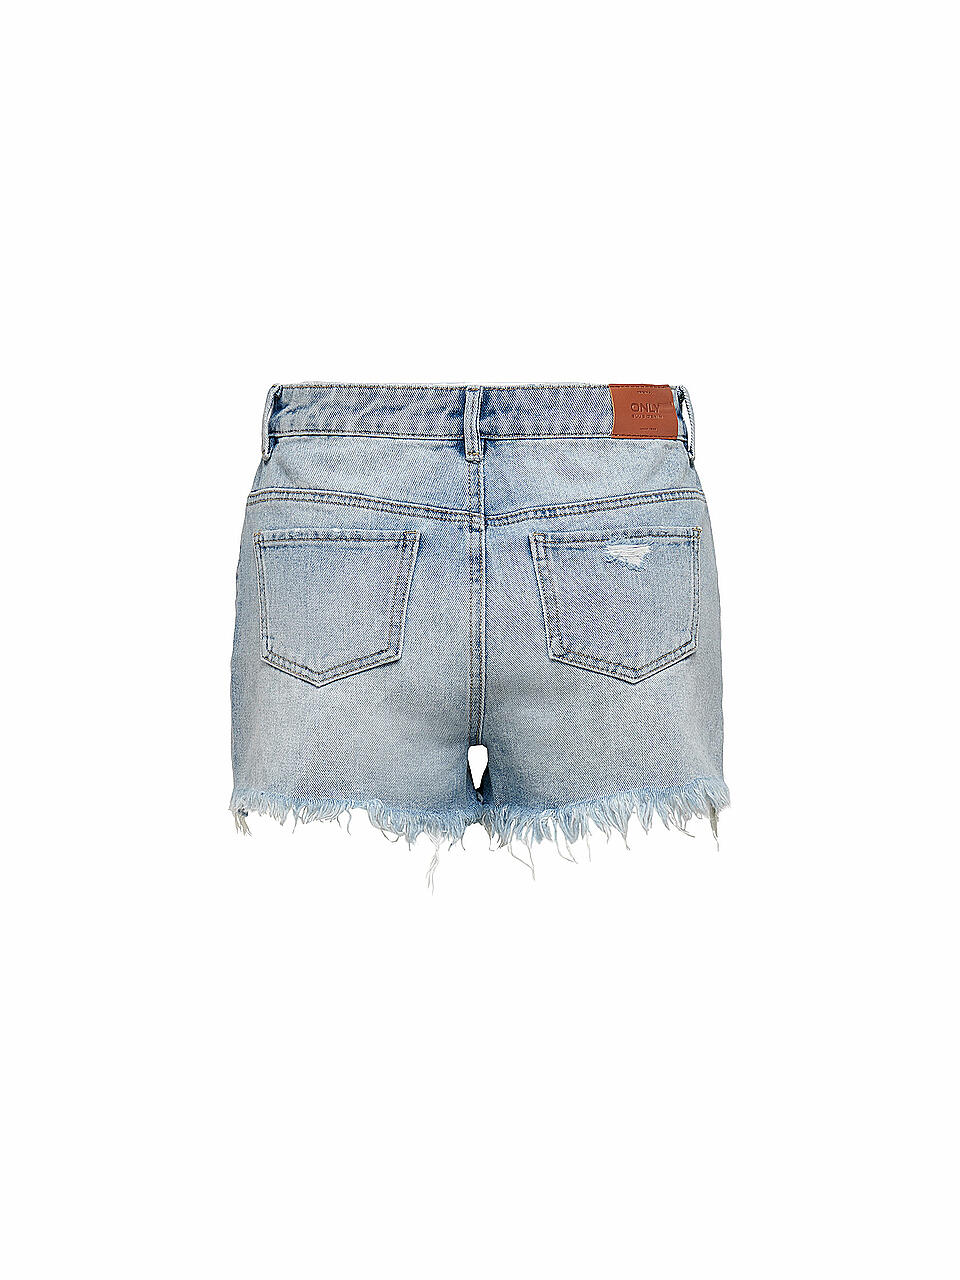 ONLY | Jeansshorts ONLPACY | hellblau